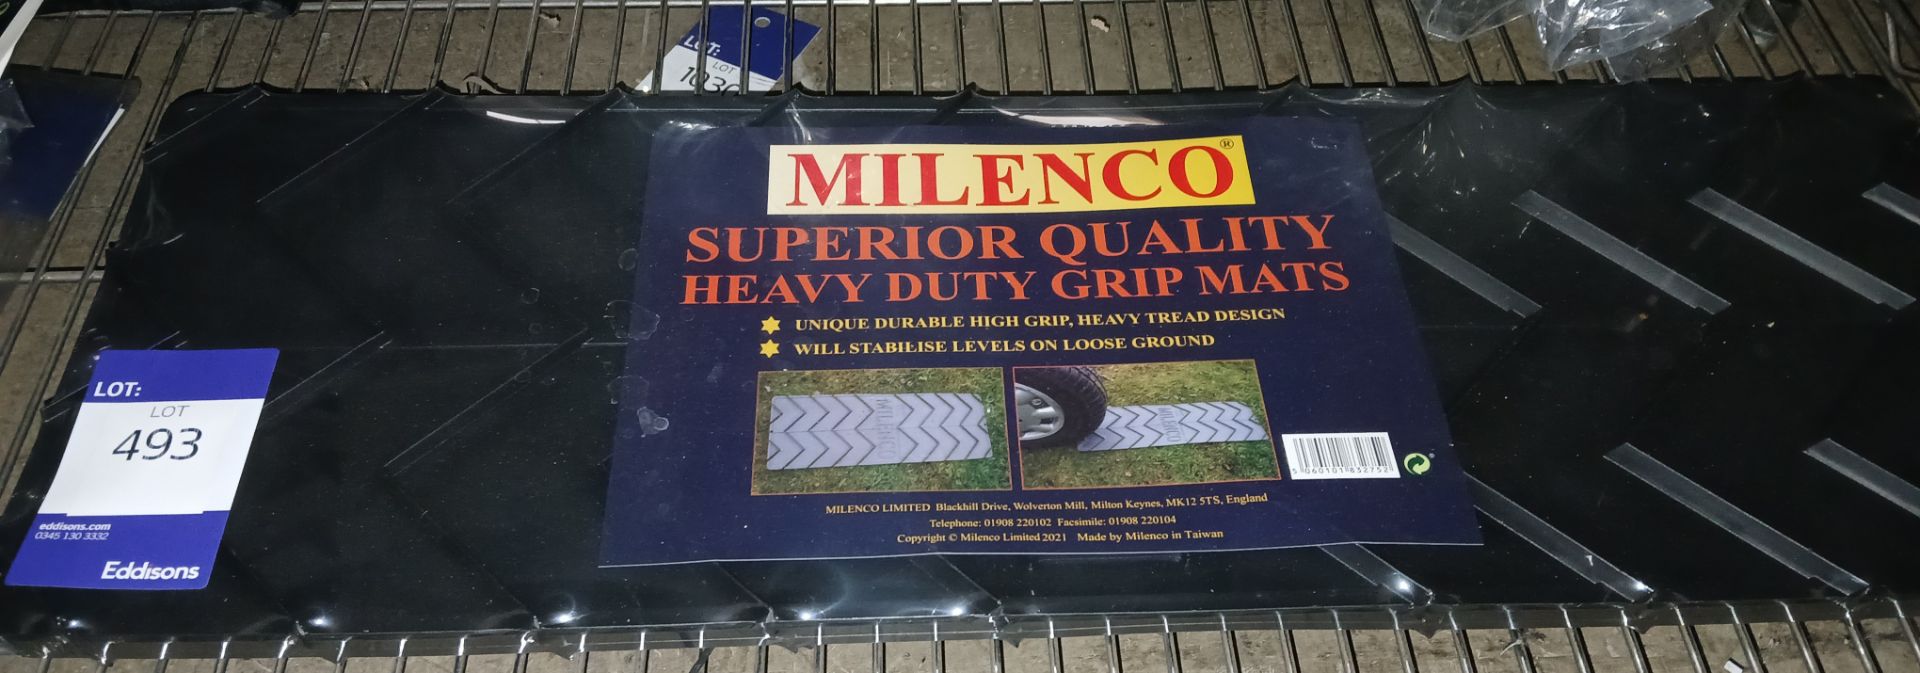 Milenco Heavy Duty Grip Mats (Please note, Viewing Strongly Recommended - Eddisons have not